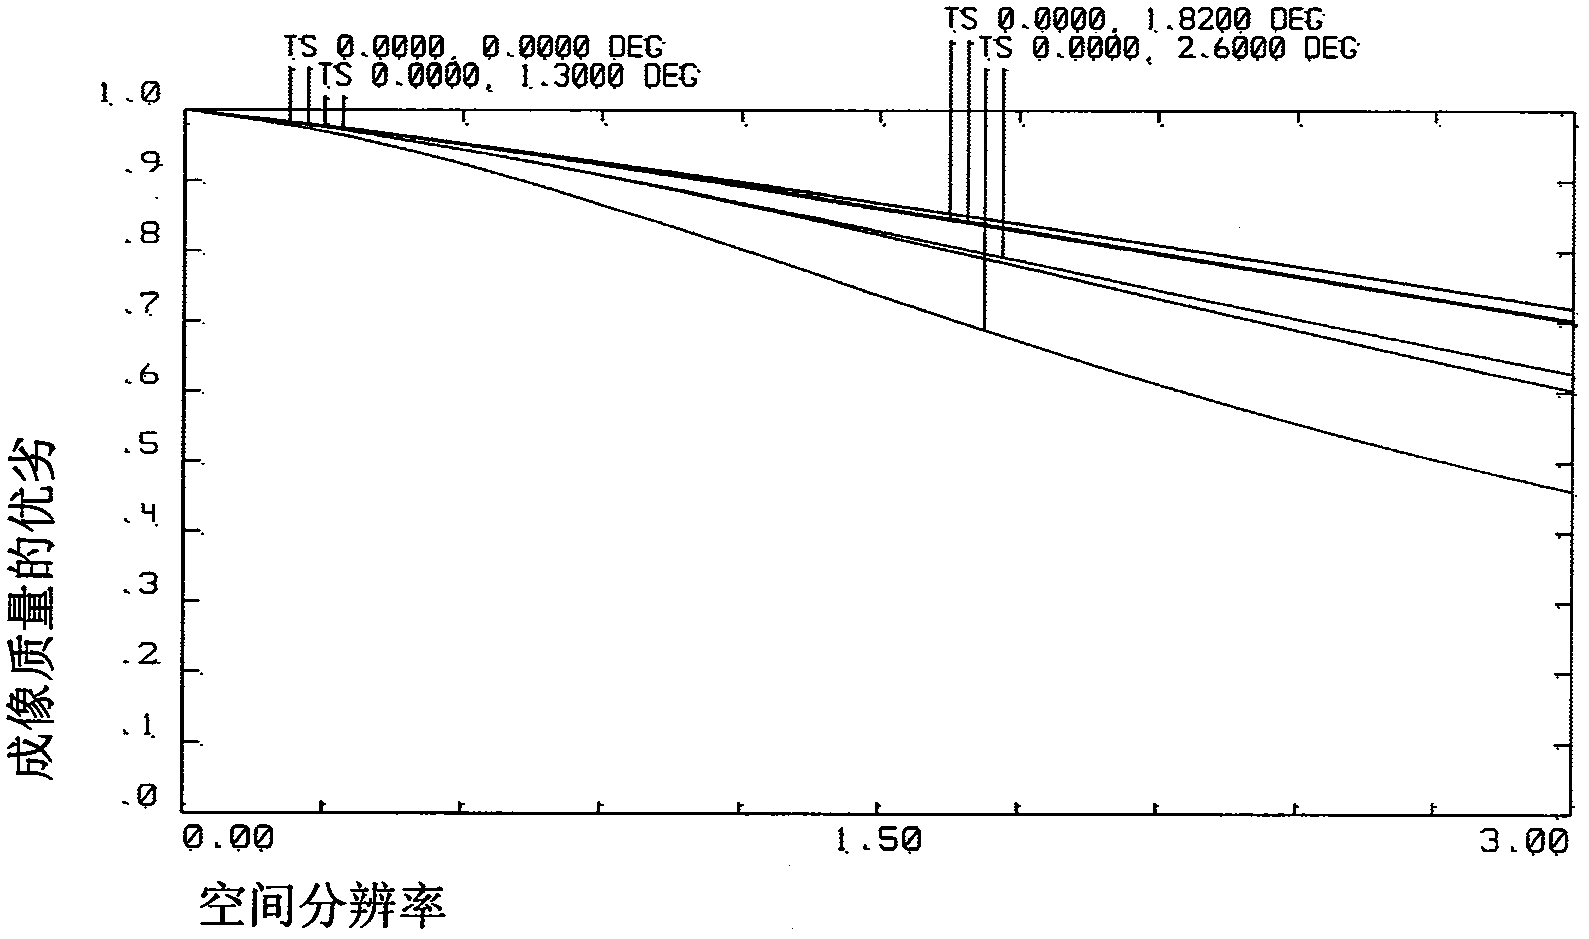 Transmission-type infrared temperature difference standard source applied to wide-temperature-range environment